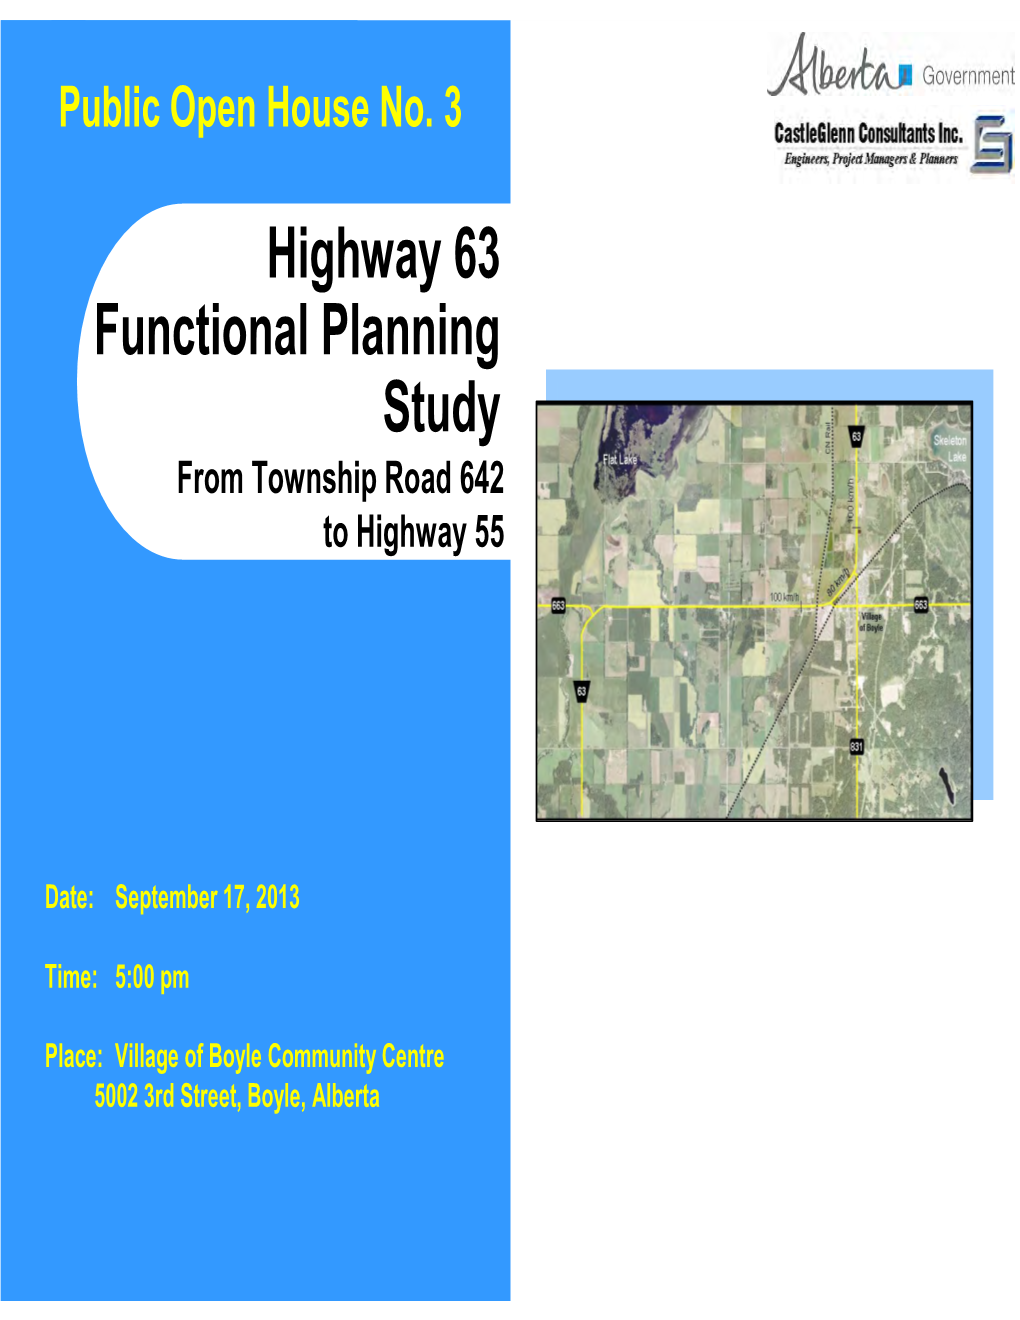 Highway 63 Functional Planning Study from Township Road 642 to Highway 55